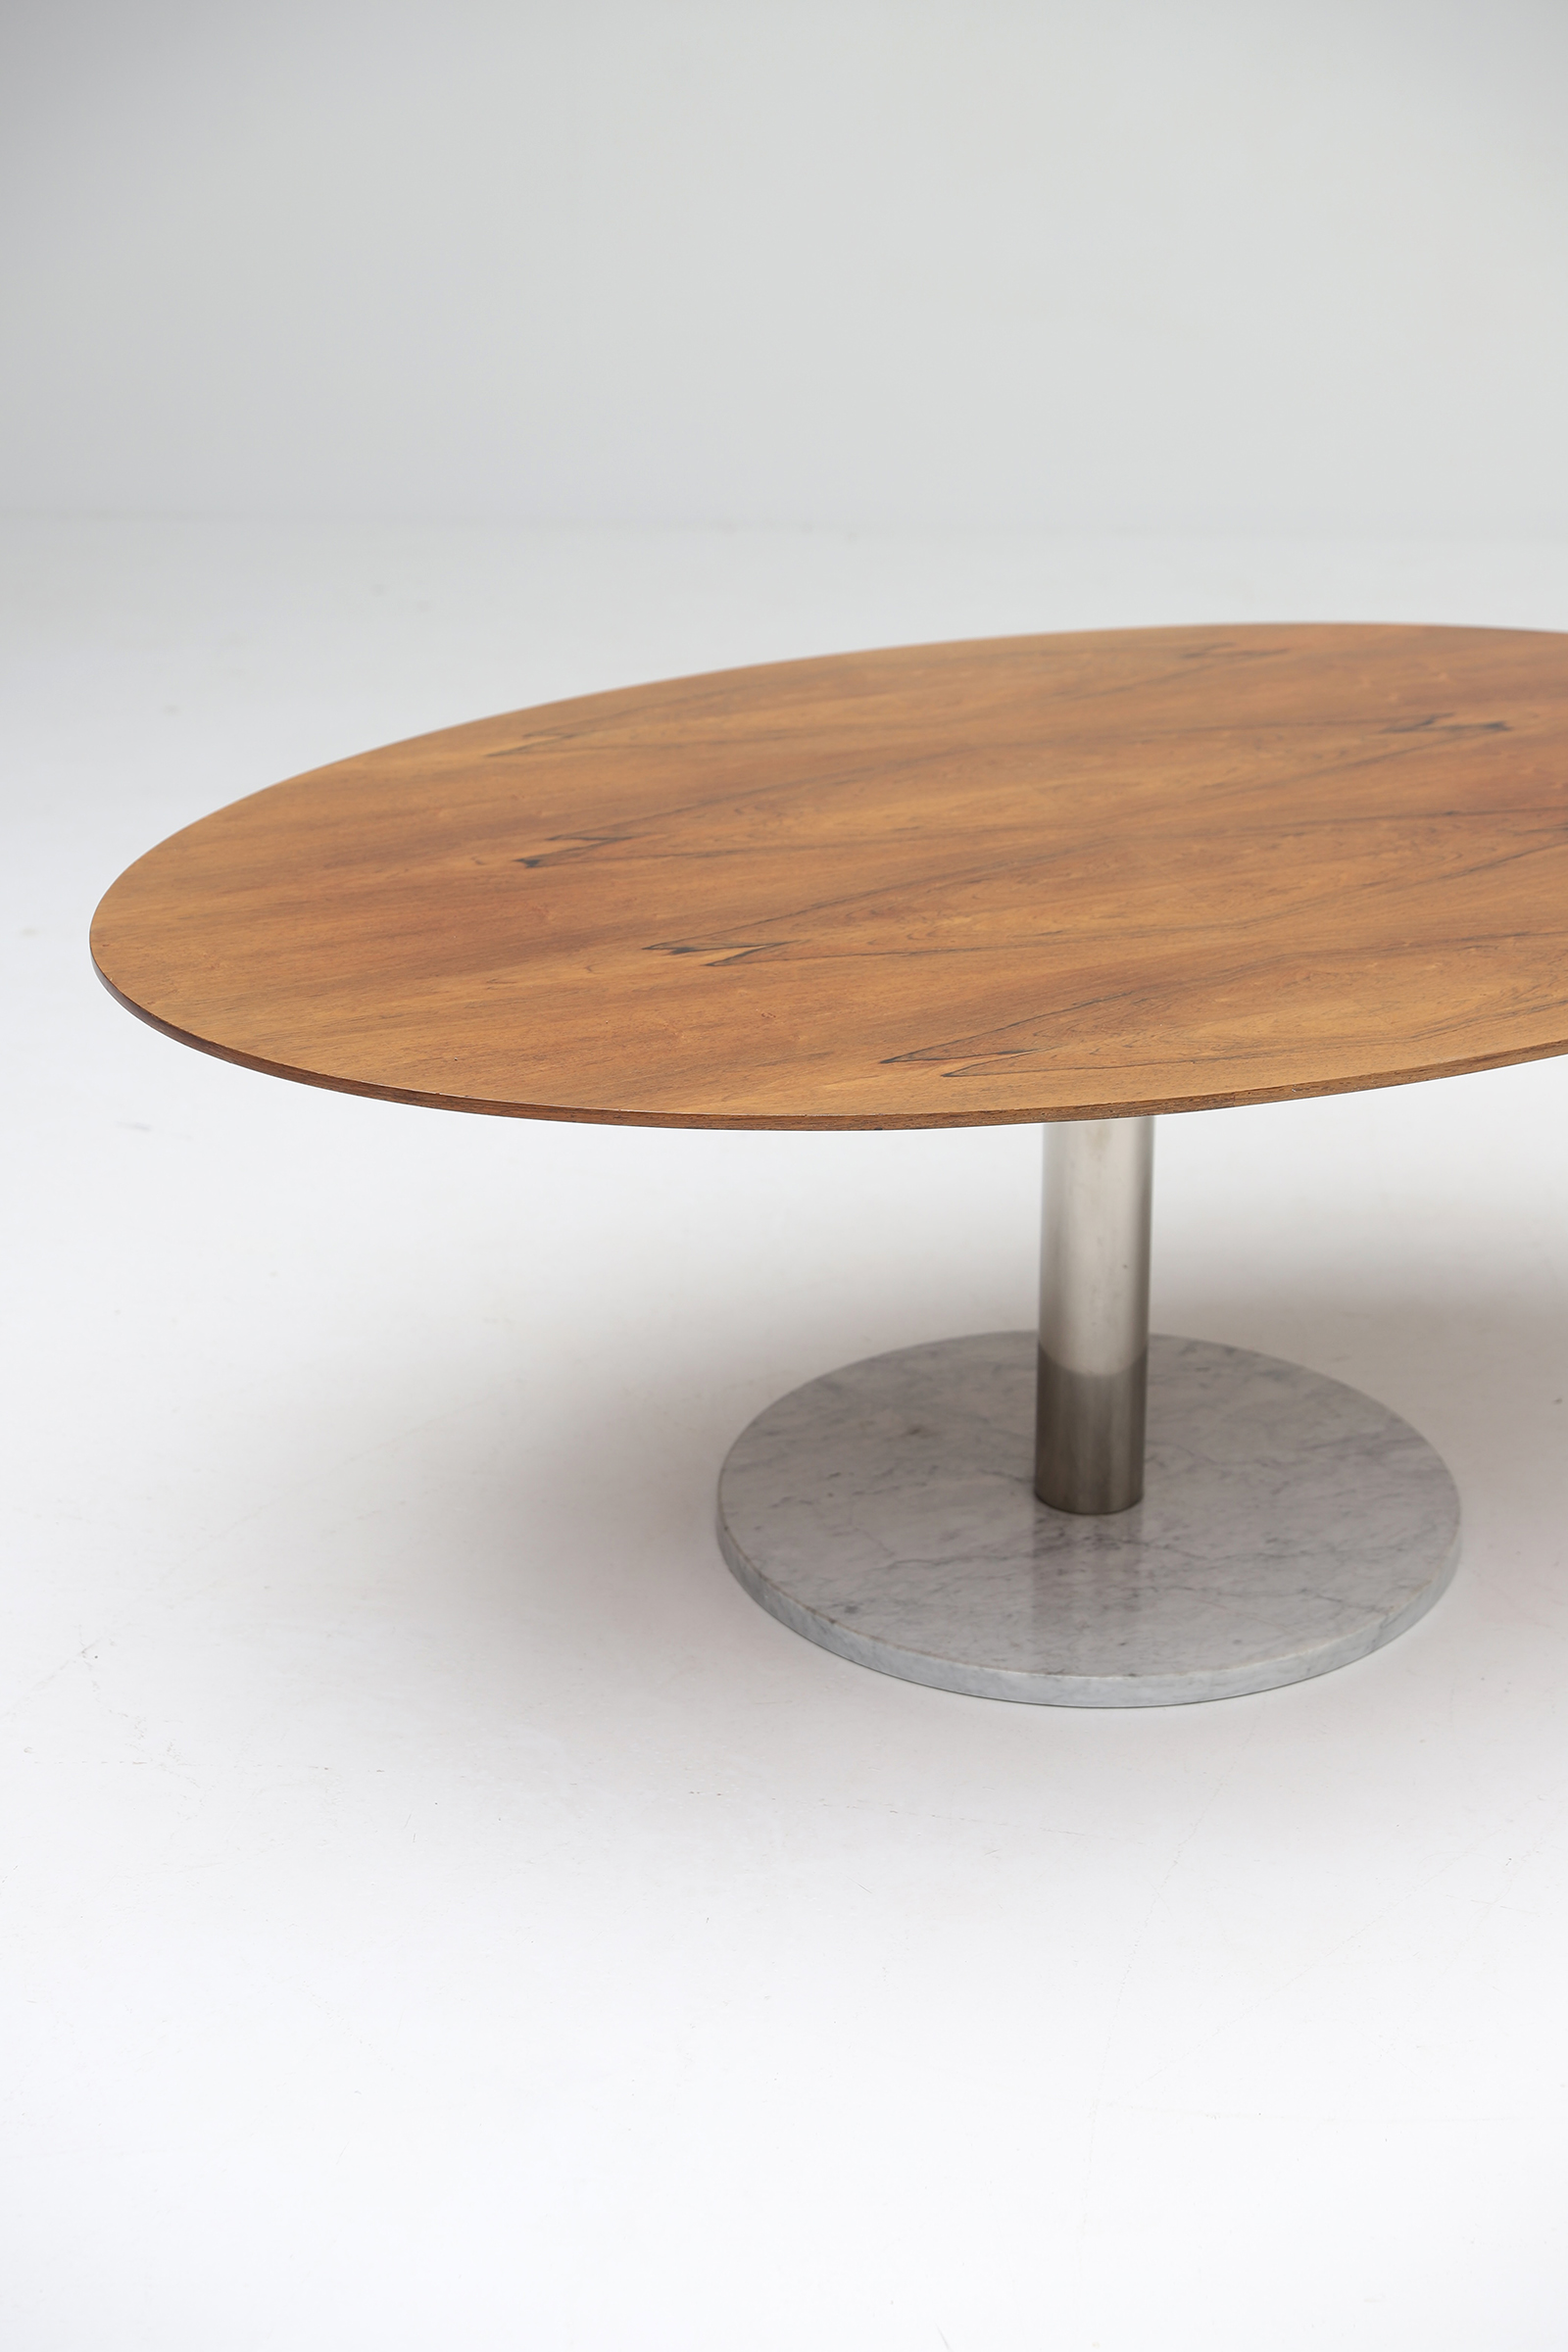 Alfred Hendrickx Oval Dining Table 1960s for Belformimage 8